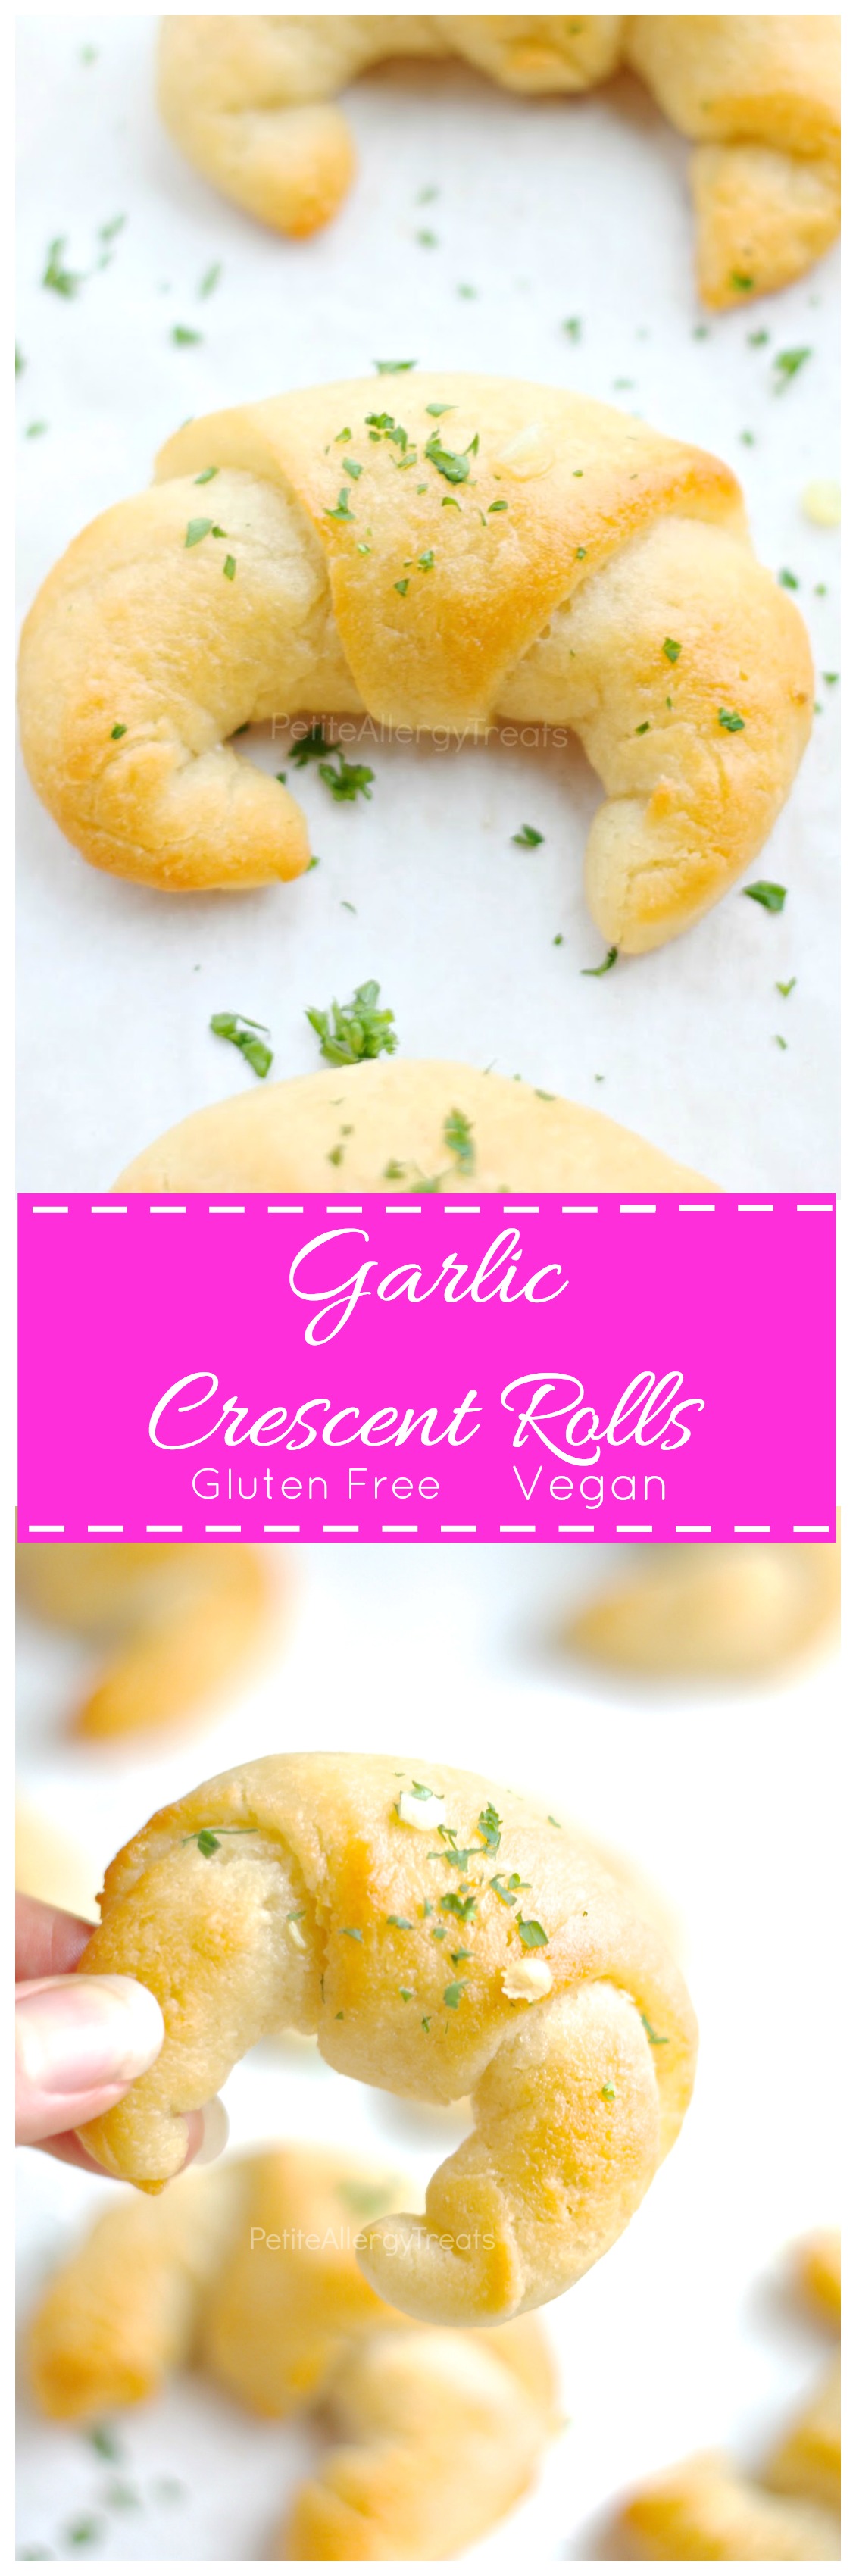 Gluten Free Vegan Garlic Crescent Rolls- Crispy and chewy these rolls are perfect to feed a crowd. PetiteAllergyTreats #shop, #mypicknsave